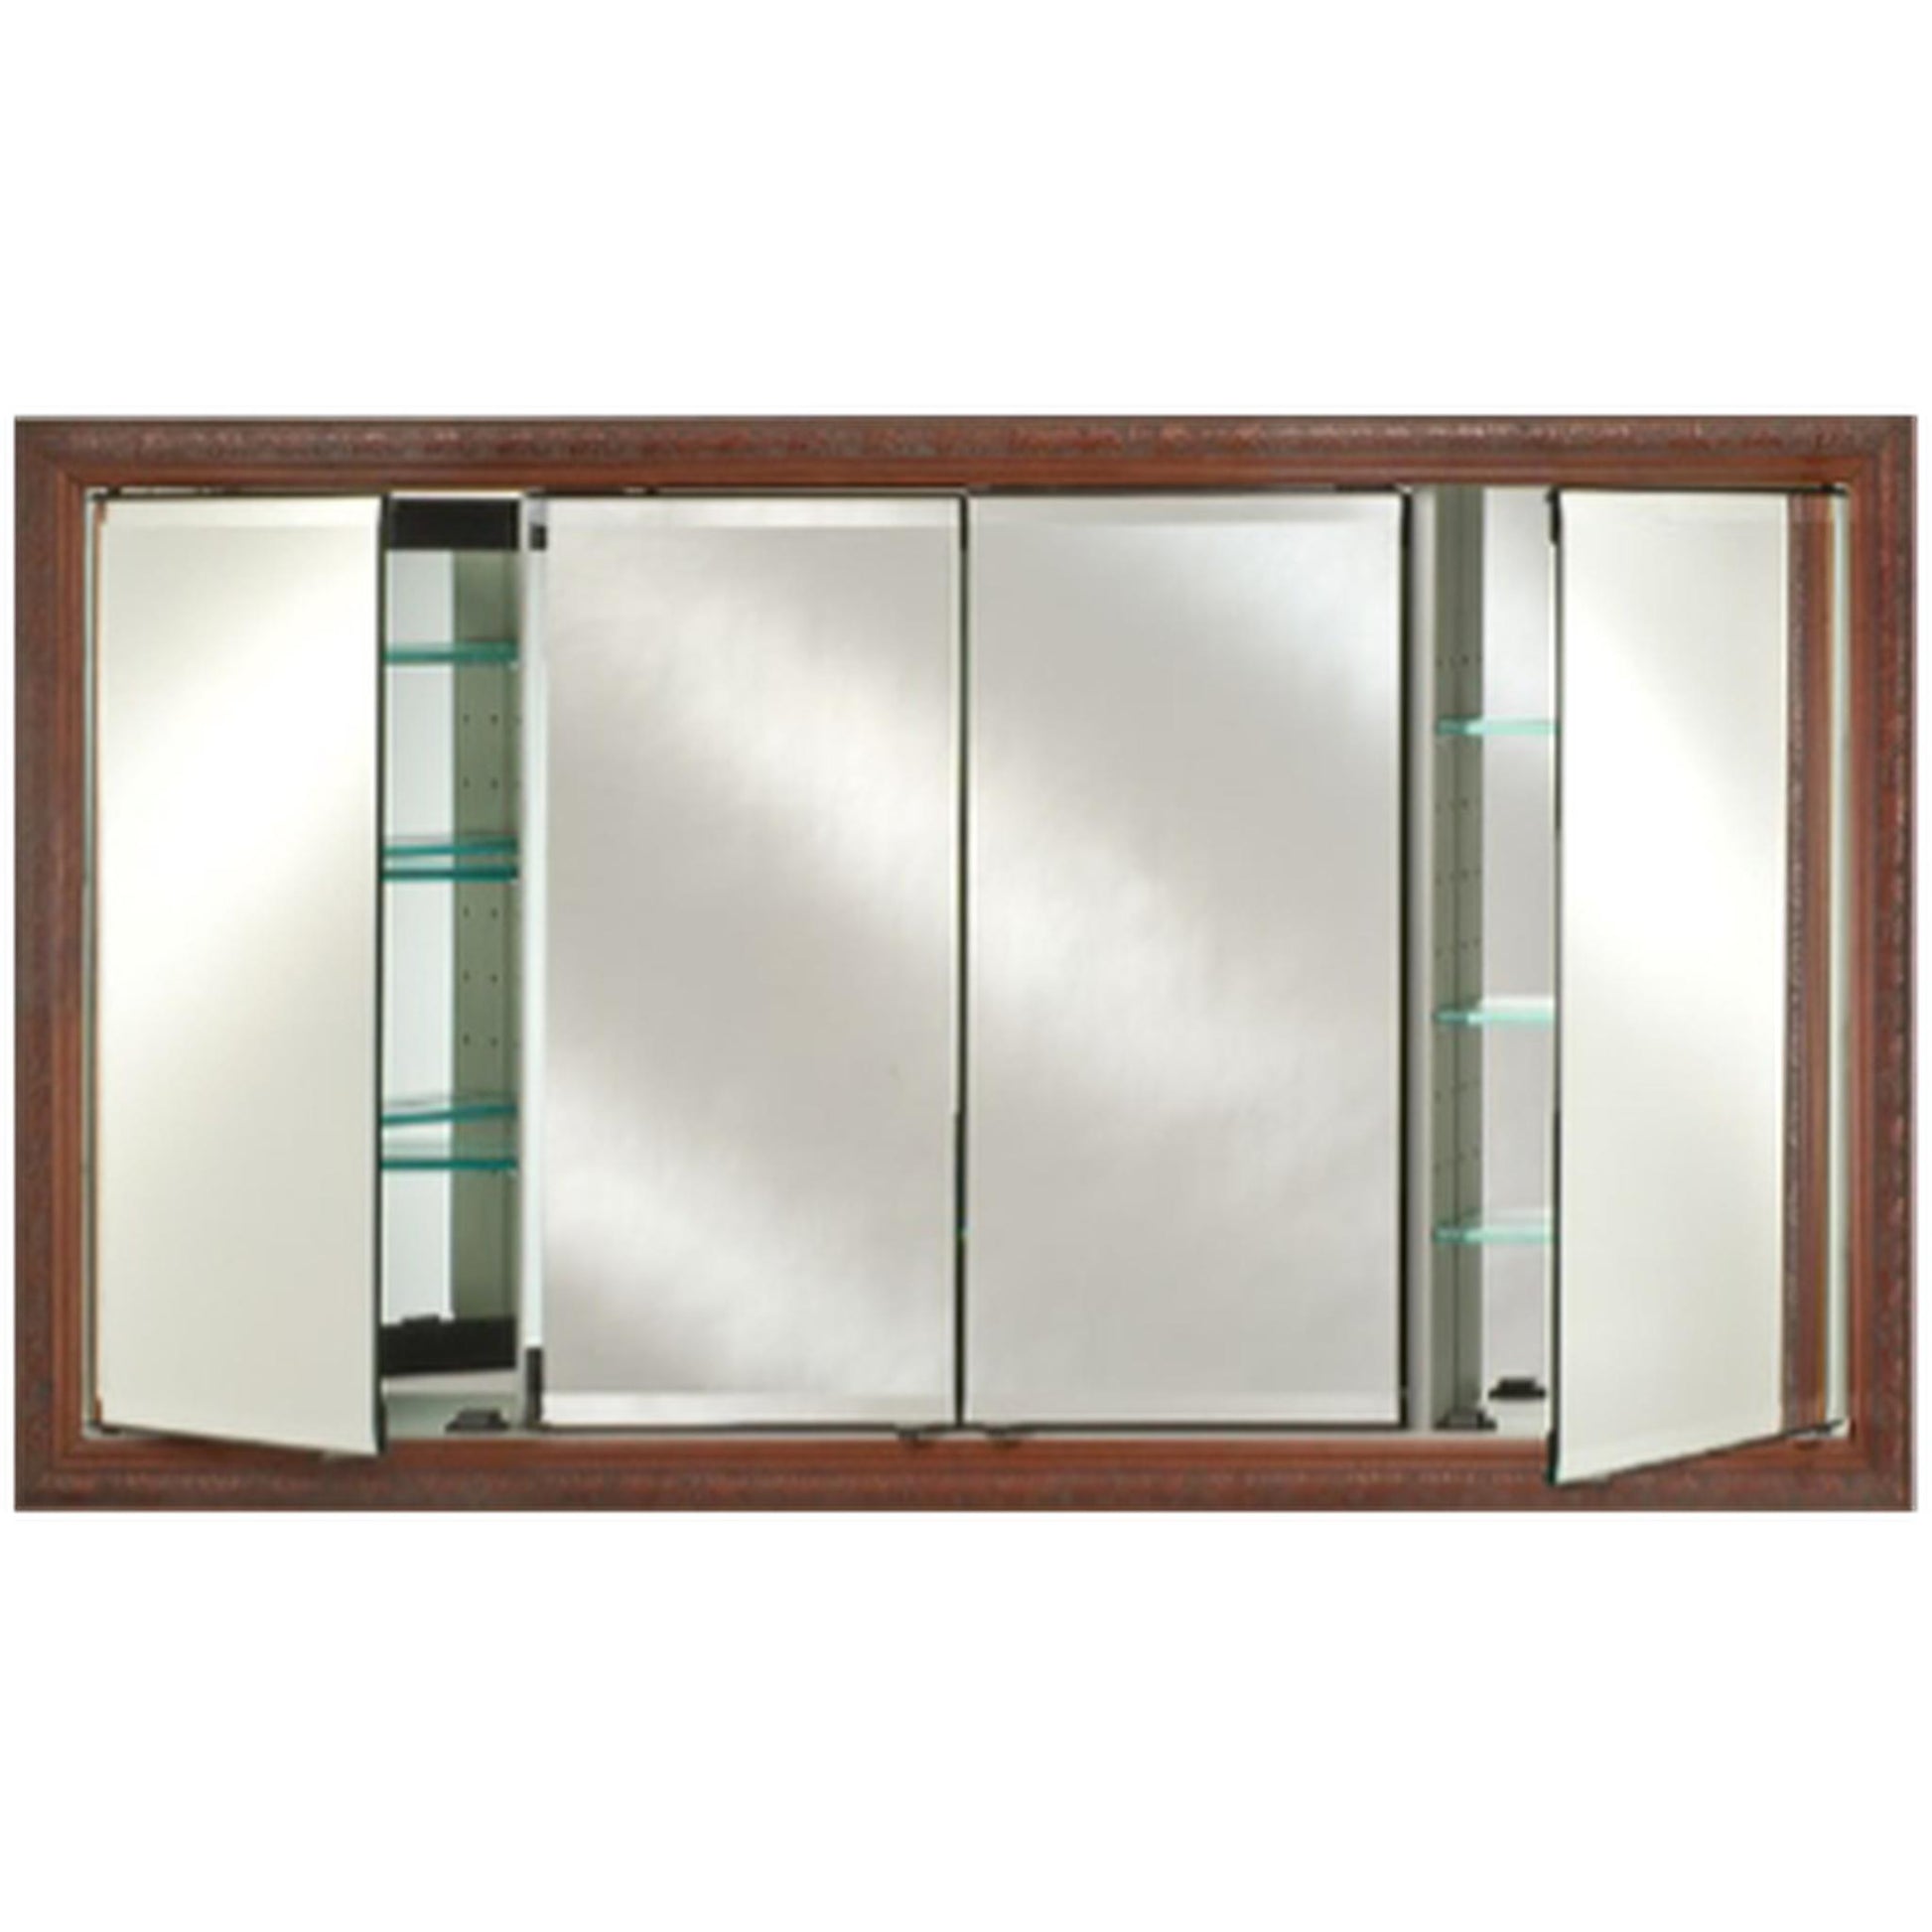 Afina Signature 58" x 30" Polished Glimmer-Scallop Recessed Four Door Medicine Cabinet With Beveled Edge Mirror